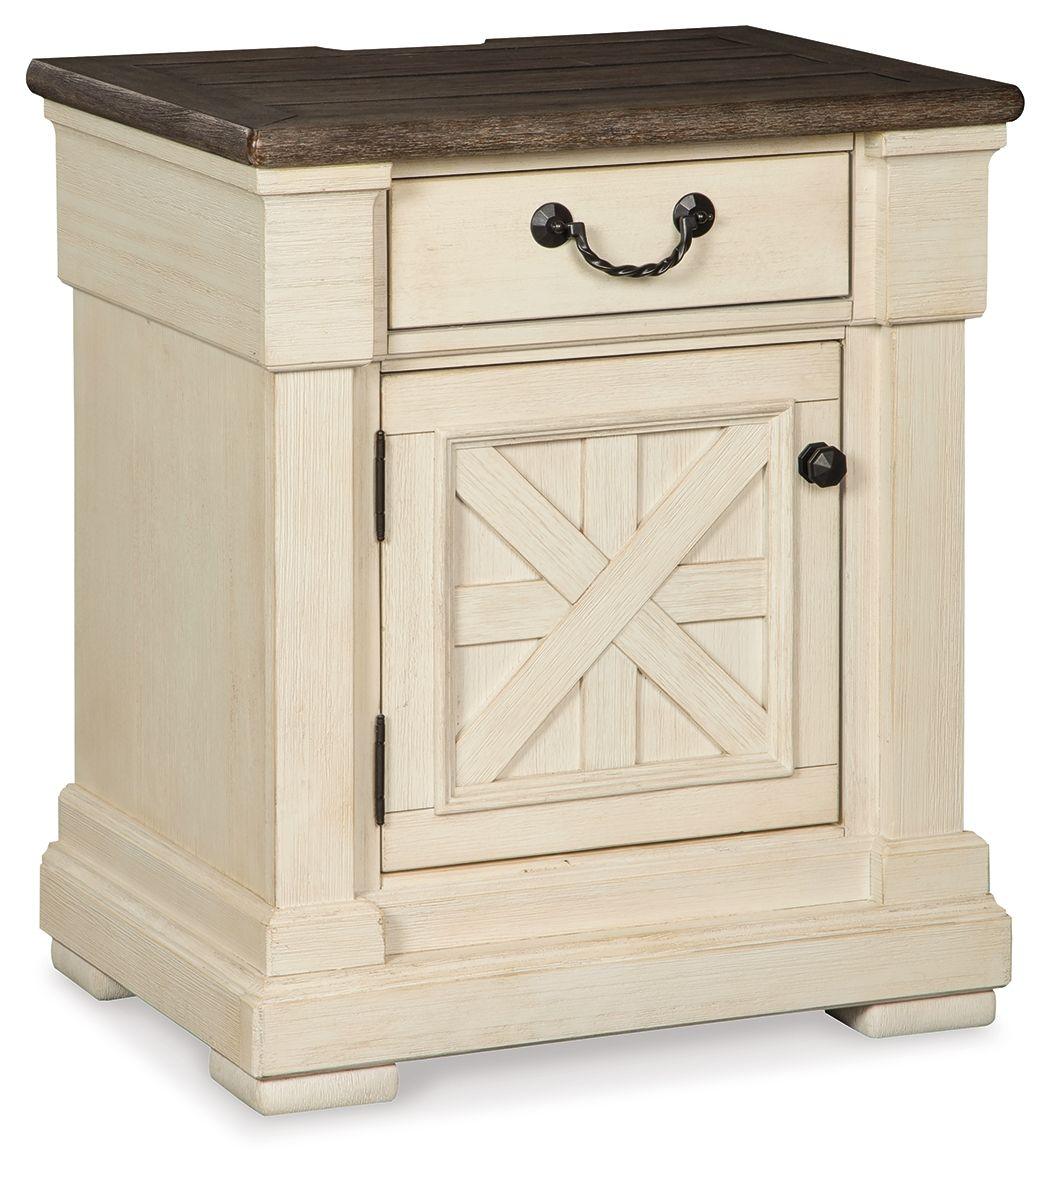 Ashley Furniture - Bolanburg - Antique Brown Light - One Drawer Night Stand - 5th Avenue Furniture